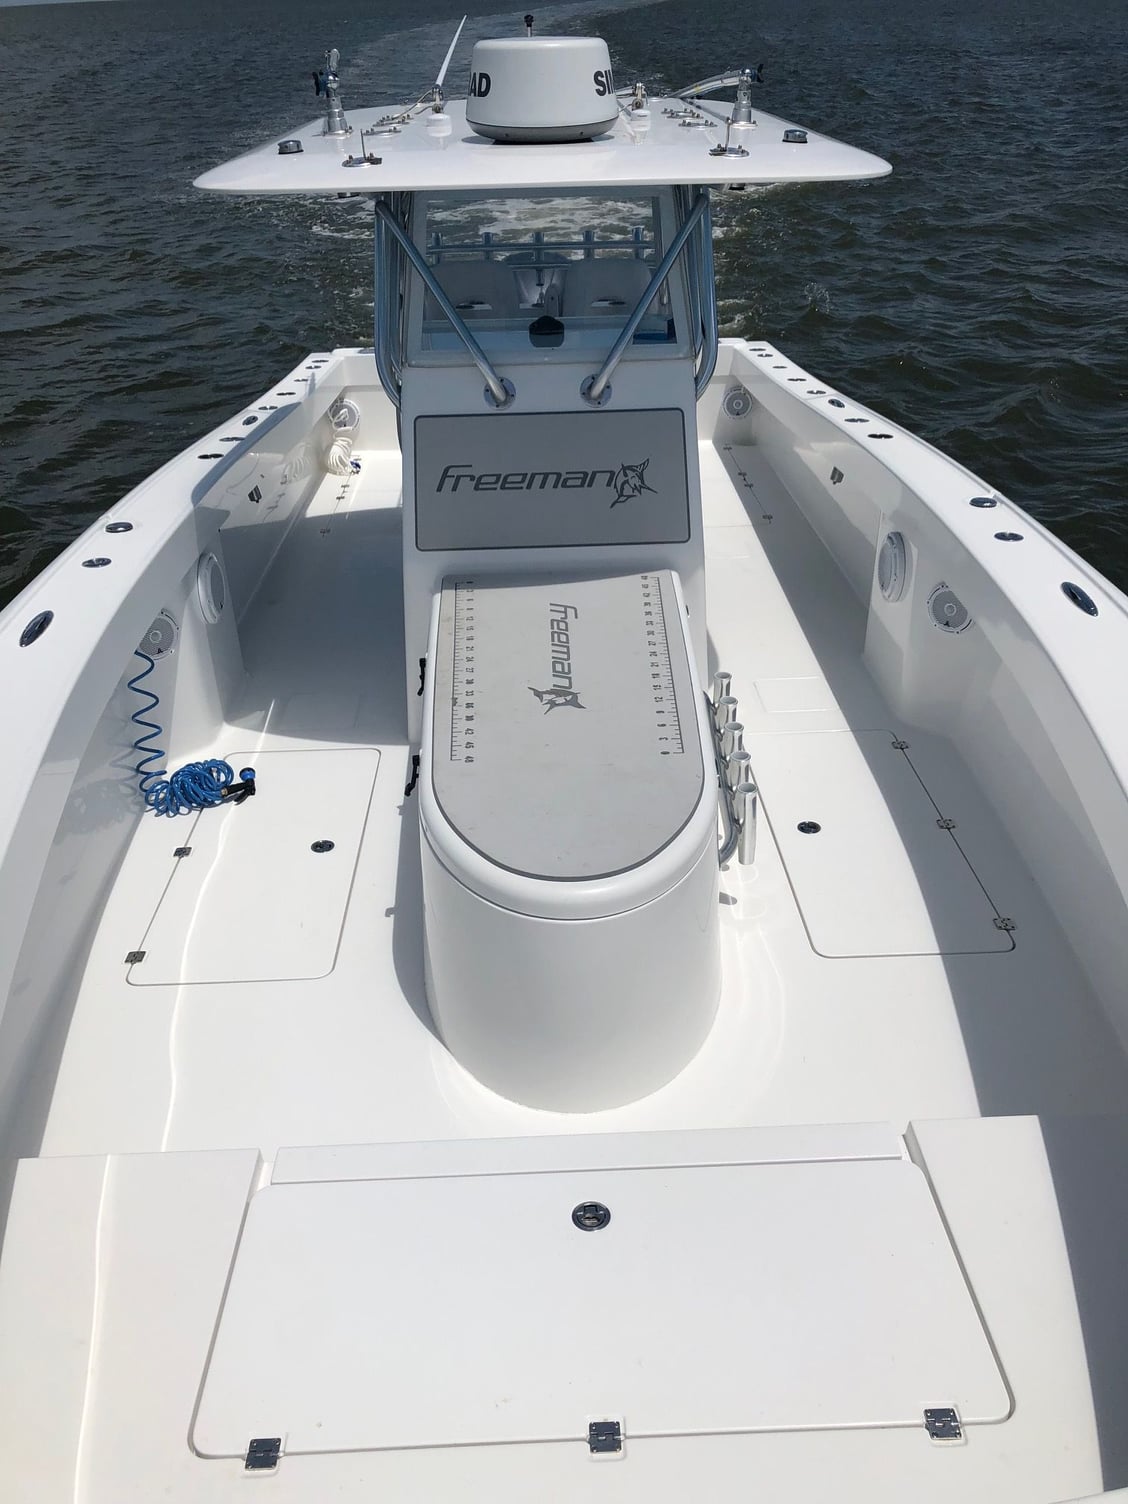 '15 freeman 34vh - for sale - reduced - The Hull Truth 